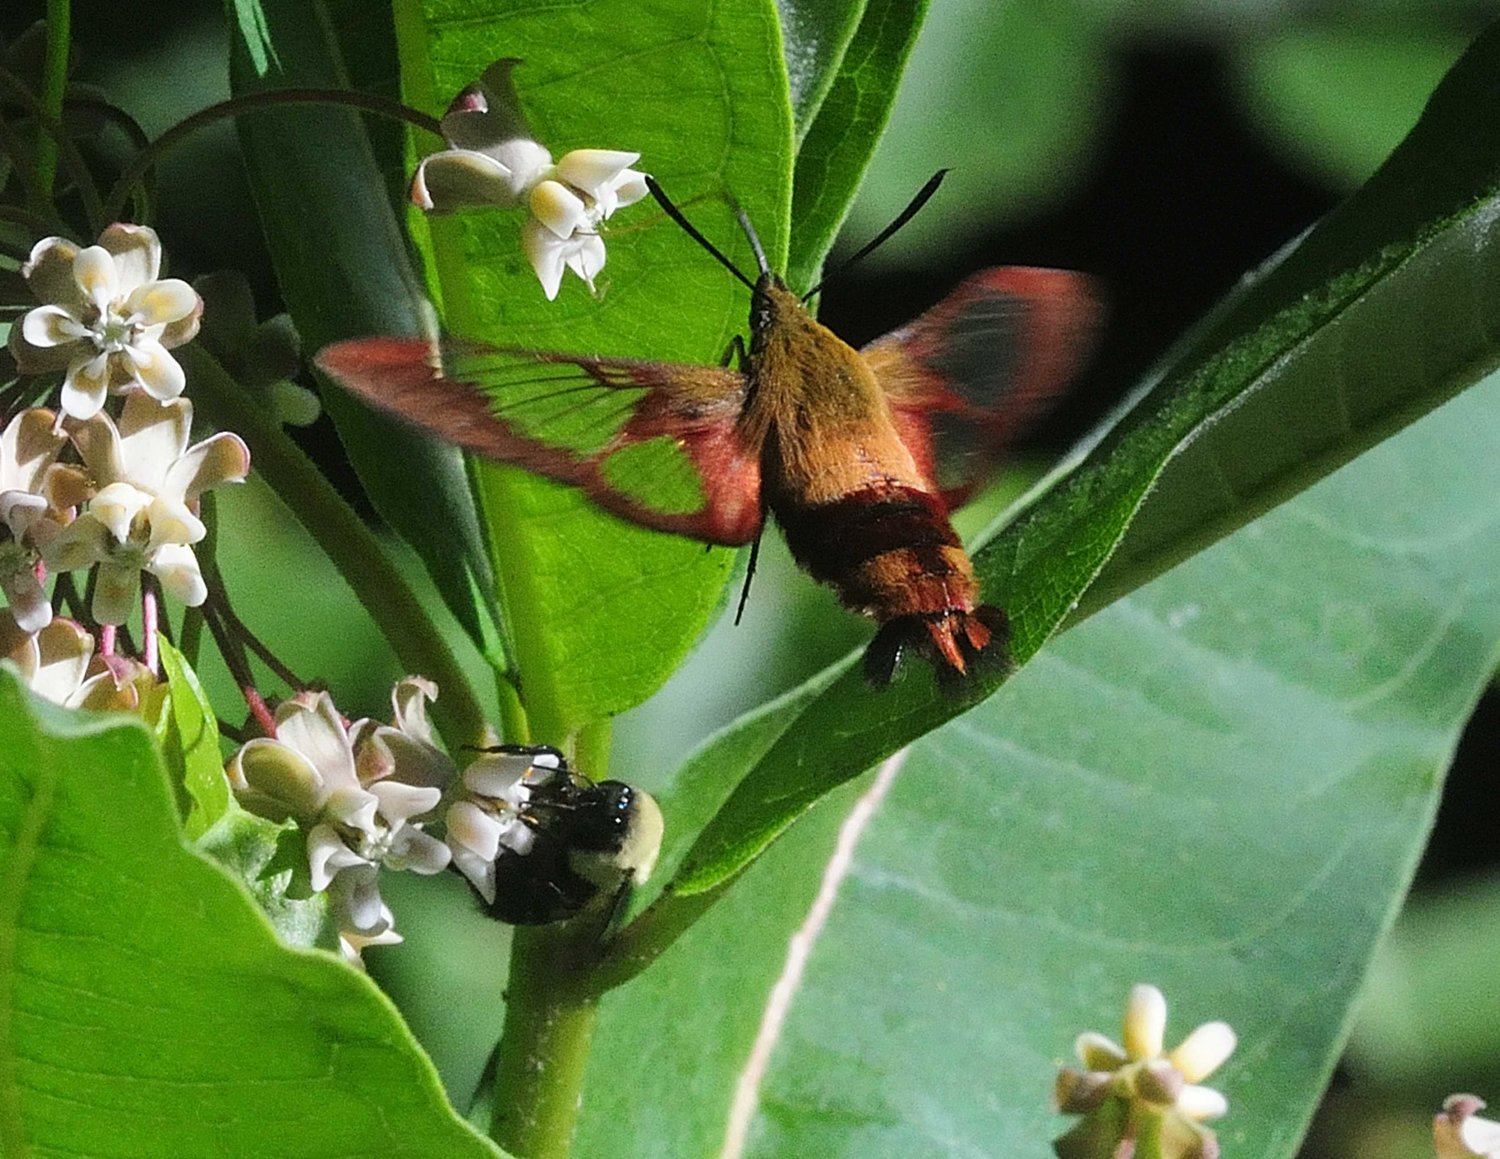 TRR photos by Scott Rando


This hummingbird clearwing moth was found sharing nectar from a milkweed plant. This moth is fascinating to watch as it mimics a ruby-throated hummingbird, hovering near flowers and taking nectar with its long proboscis while in flight. Even its wing beat frequency is similar, with 85 Hz (cycles per second) for the moth vs. 60-80 Hz for the hummingbird.